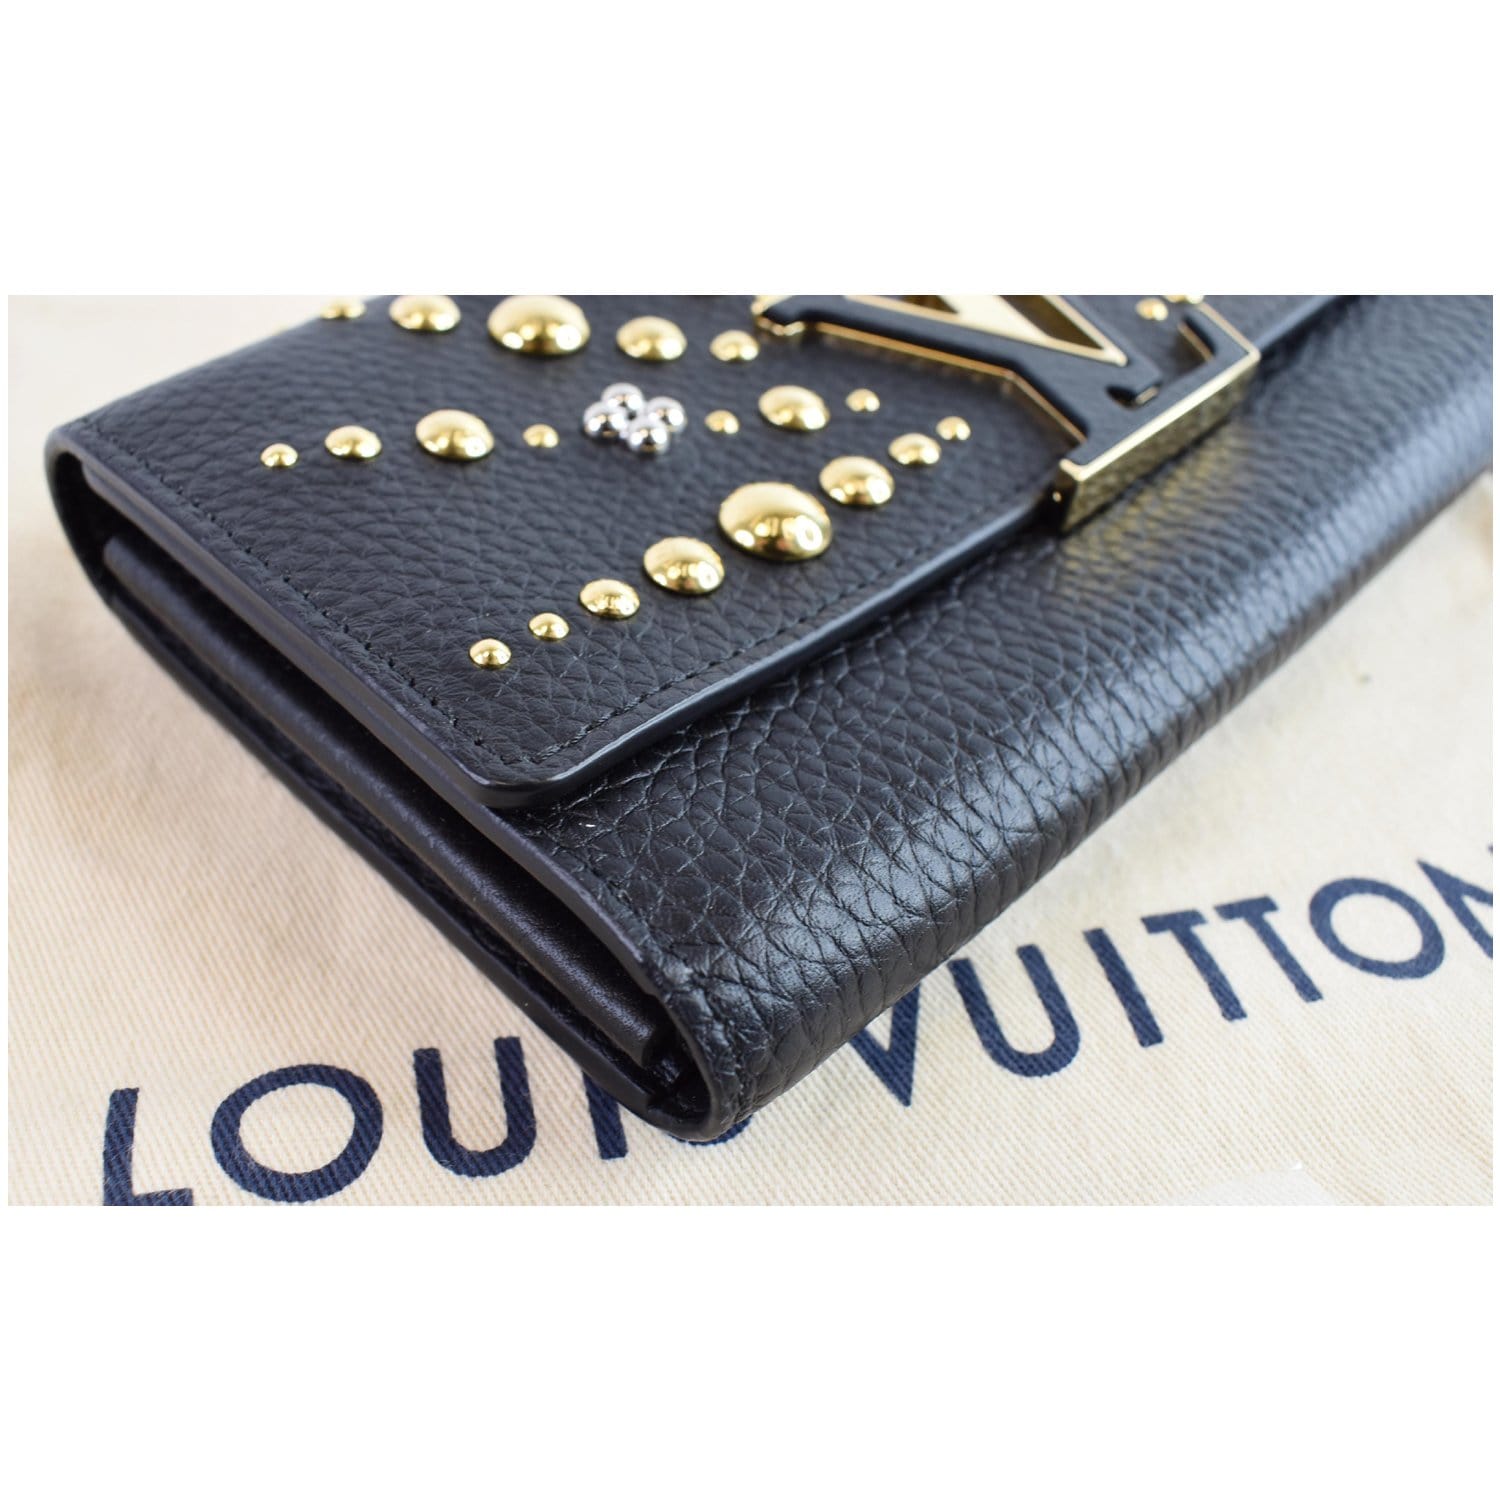 Capucines Wallet Taurillon Leather - Wallets and Small Leather Goods